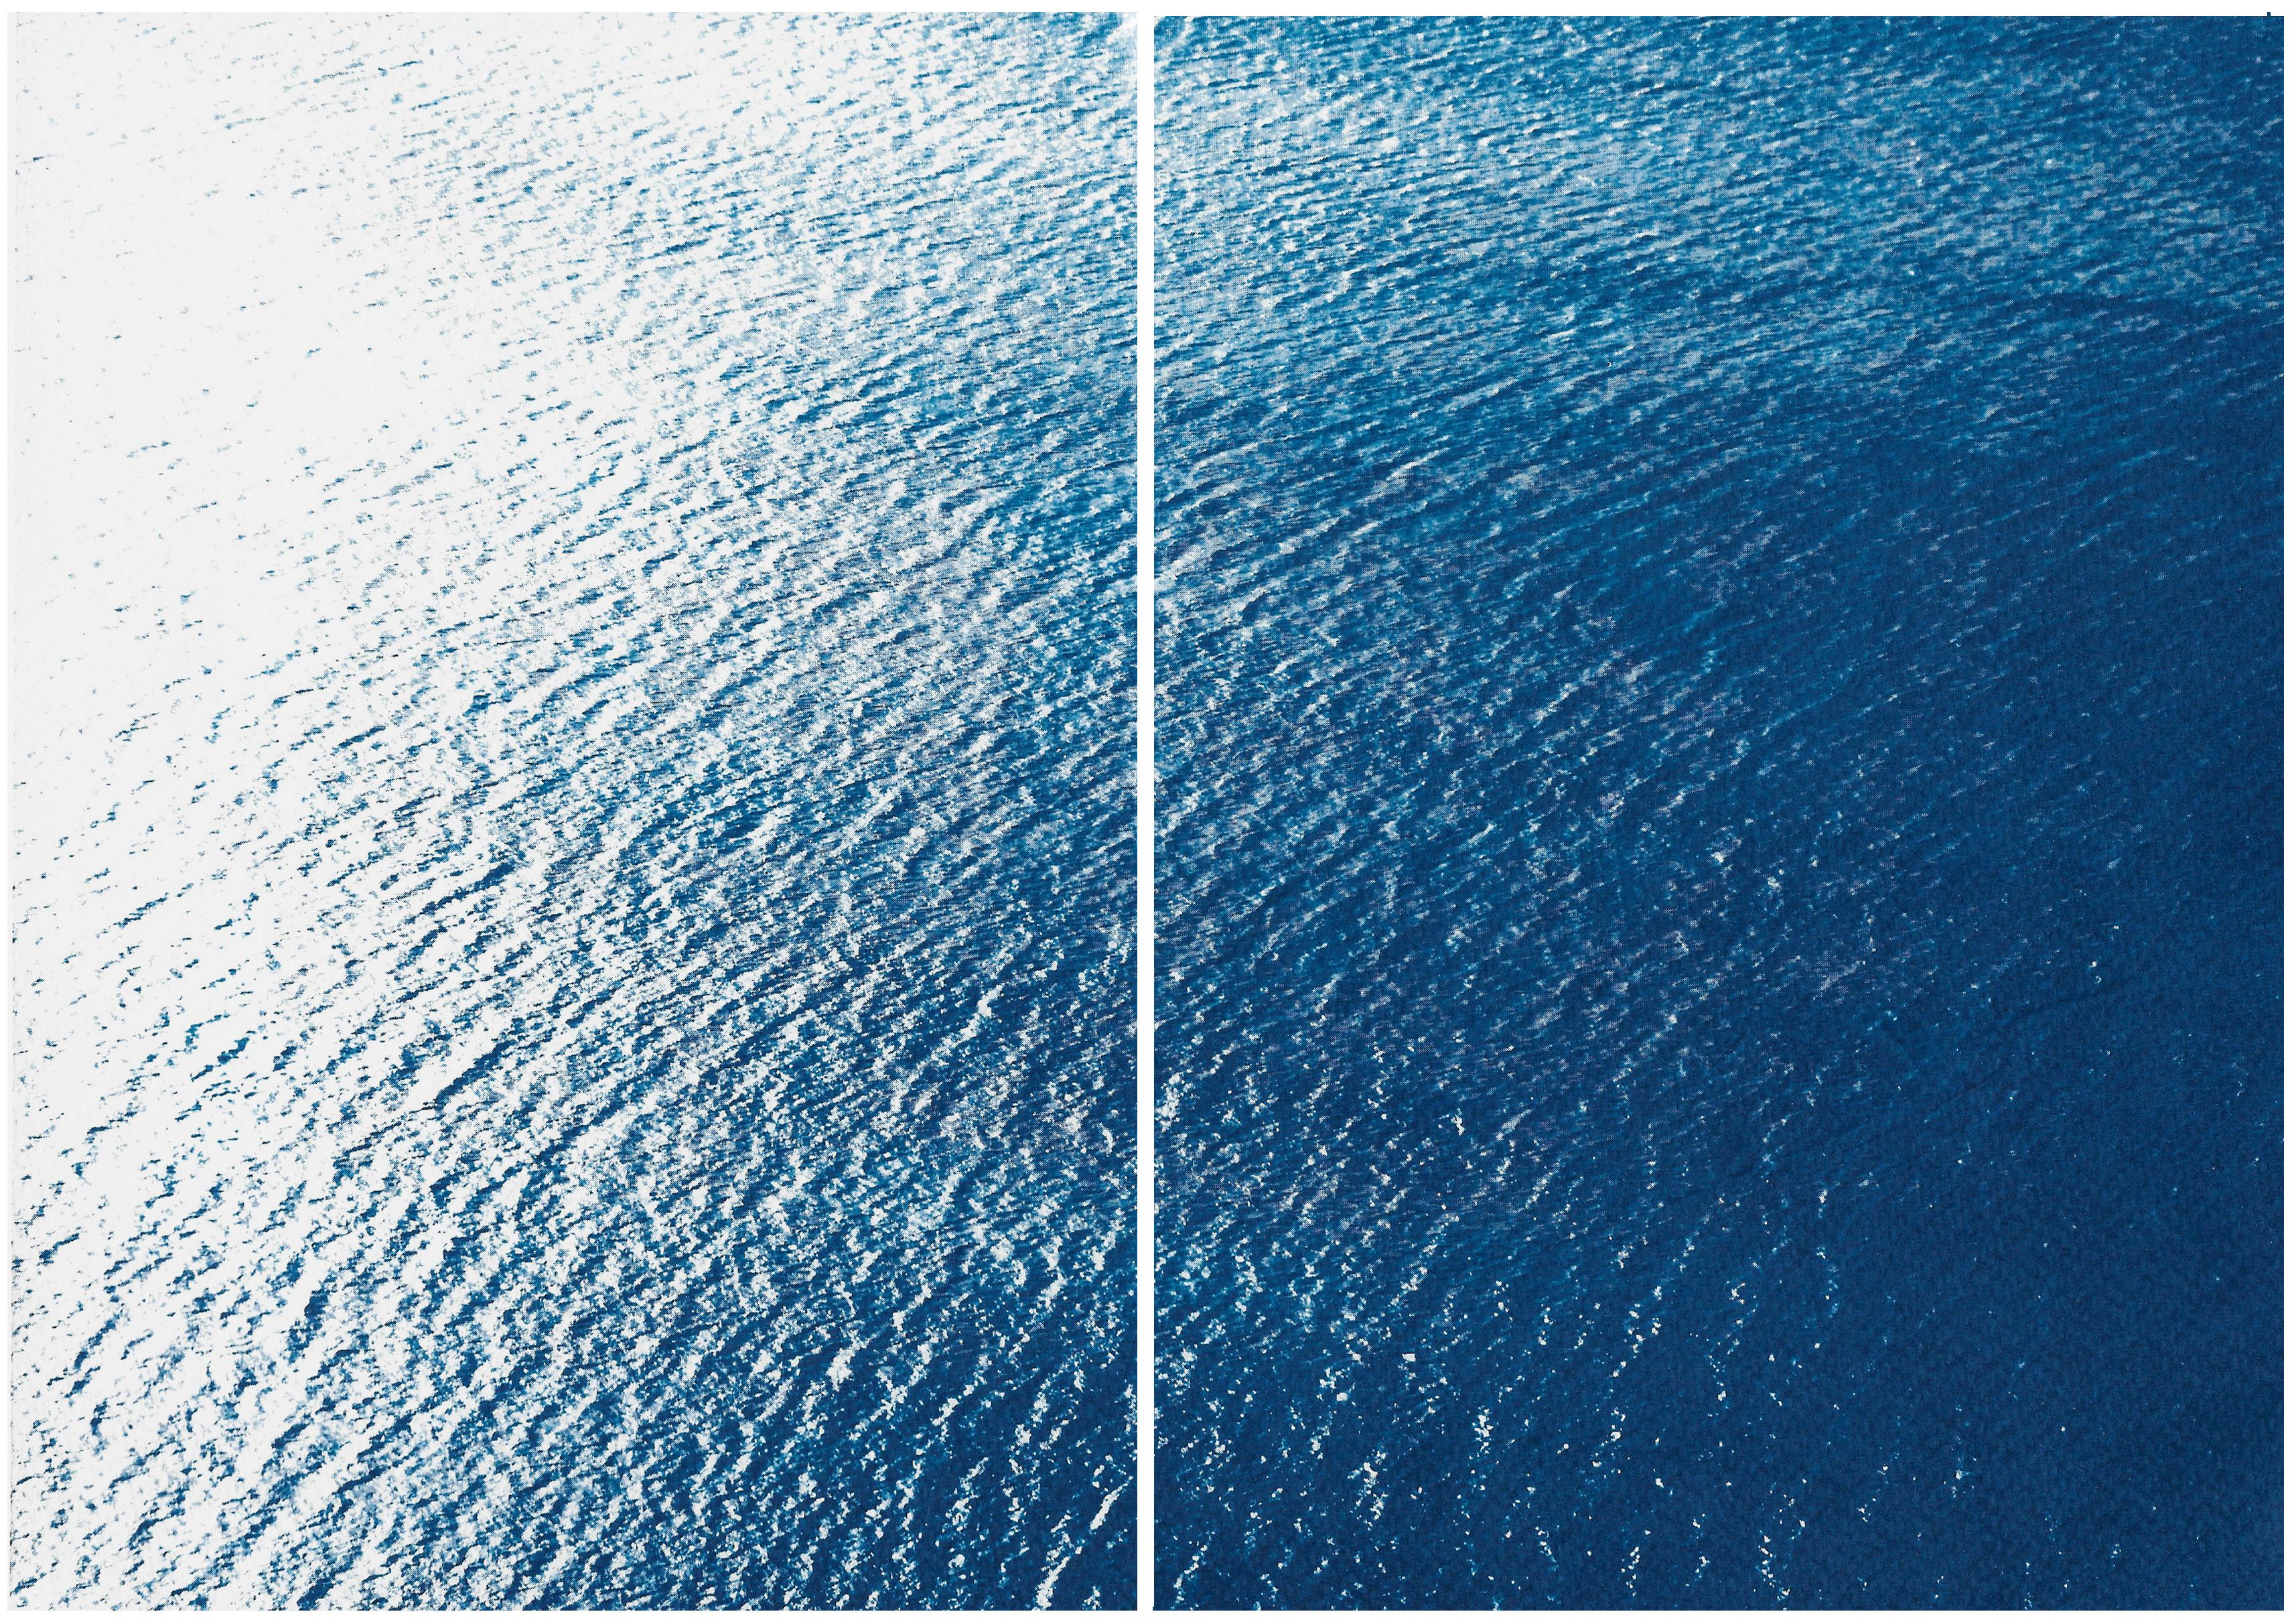 Kind of Cyan Landscape Print - Smooth Bay in the Mediterranean, Classic Blue Diptych, Zen Seascape Coastal Life